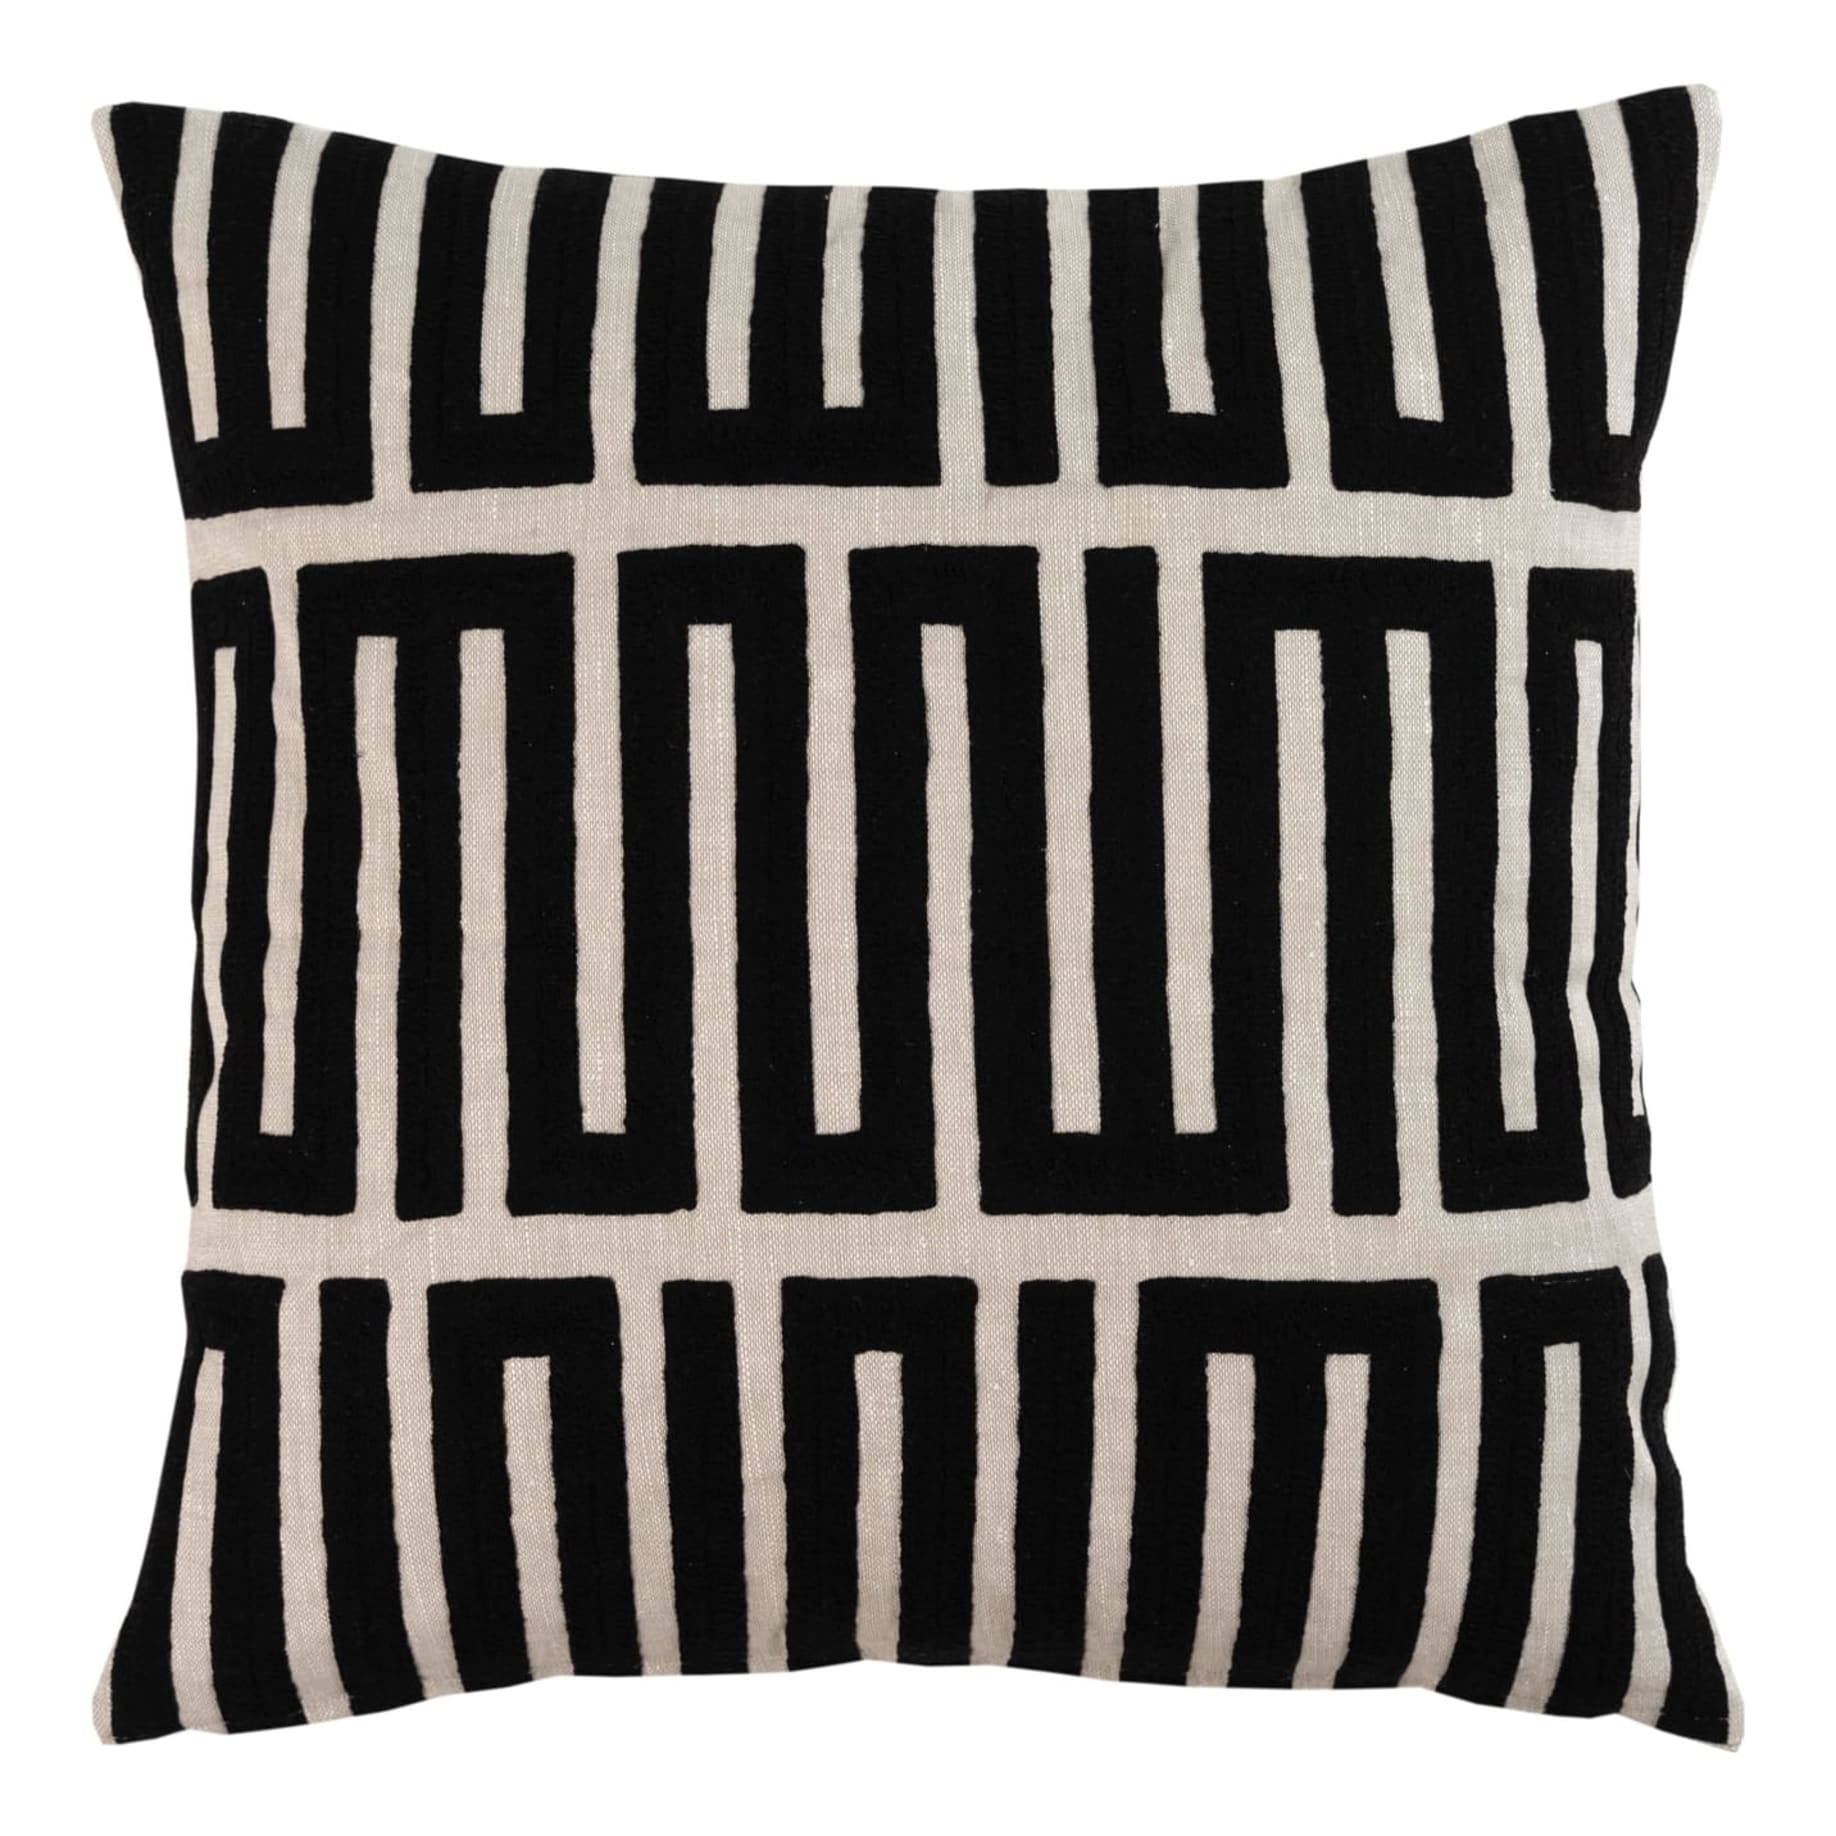 Claremont Feather Fill Cushion 50x50cm in Noir